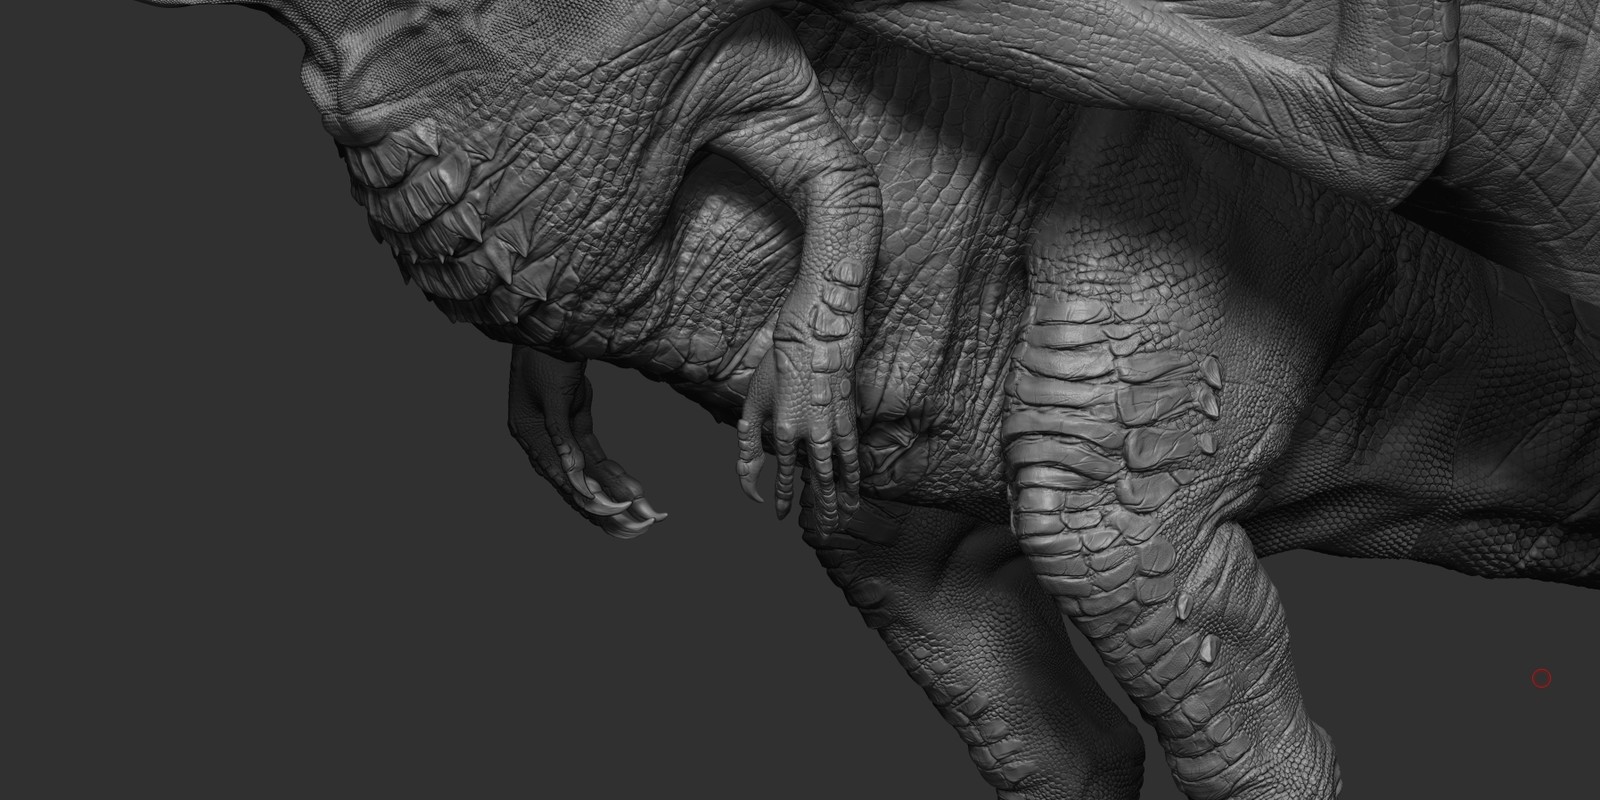 In this lecture, I show you how to add the final sculpting layer of anatomy in a lesson named "The anatomy of details"